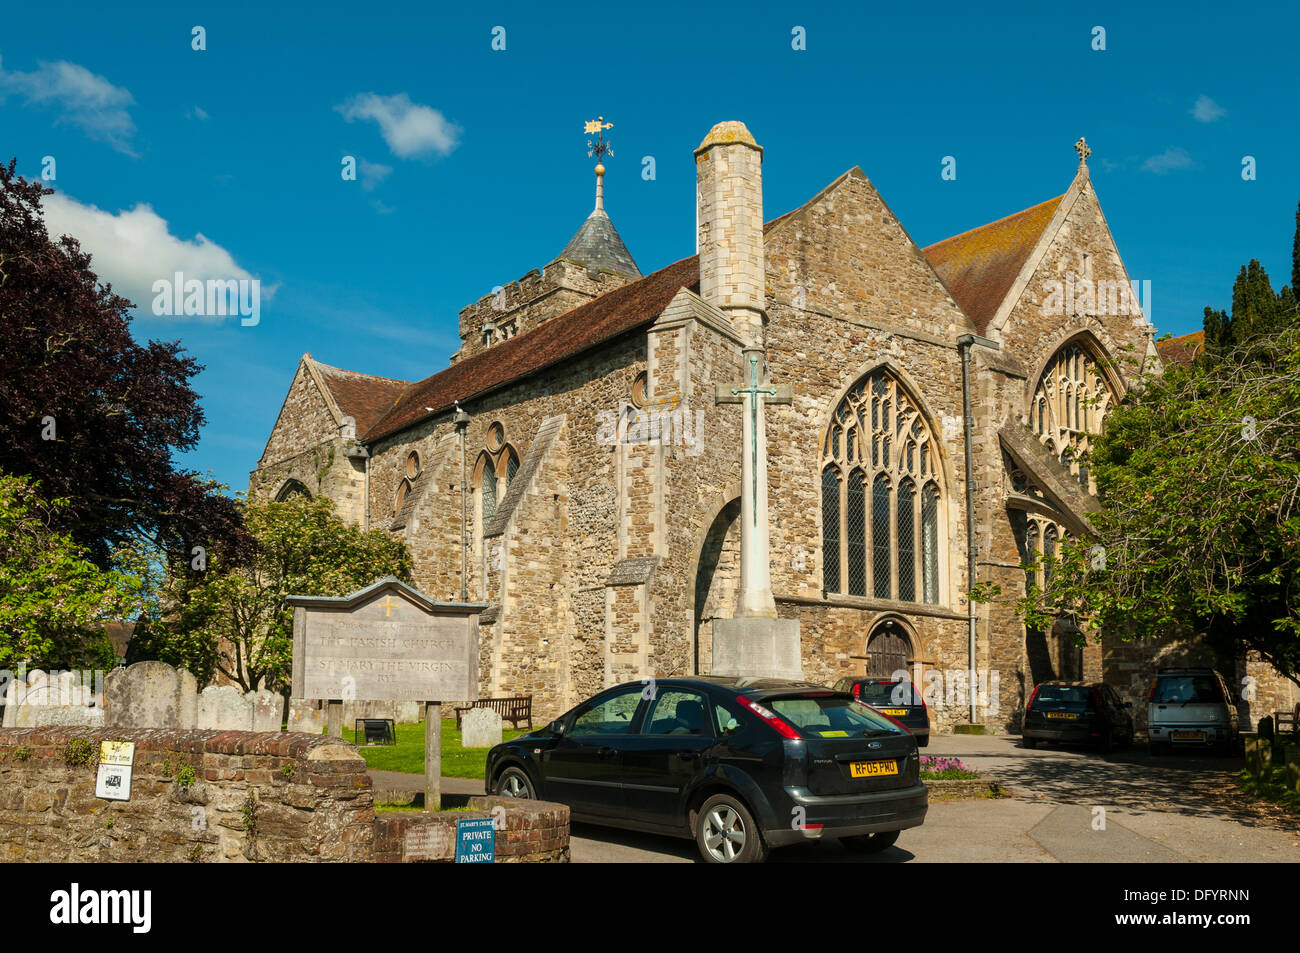 L'église St Mary, Rye, East Sussex, Angleterre Banque D'Images